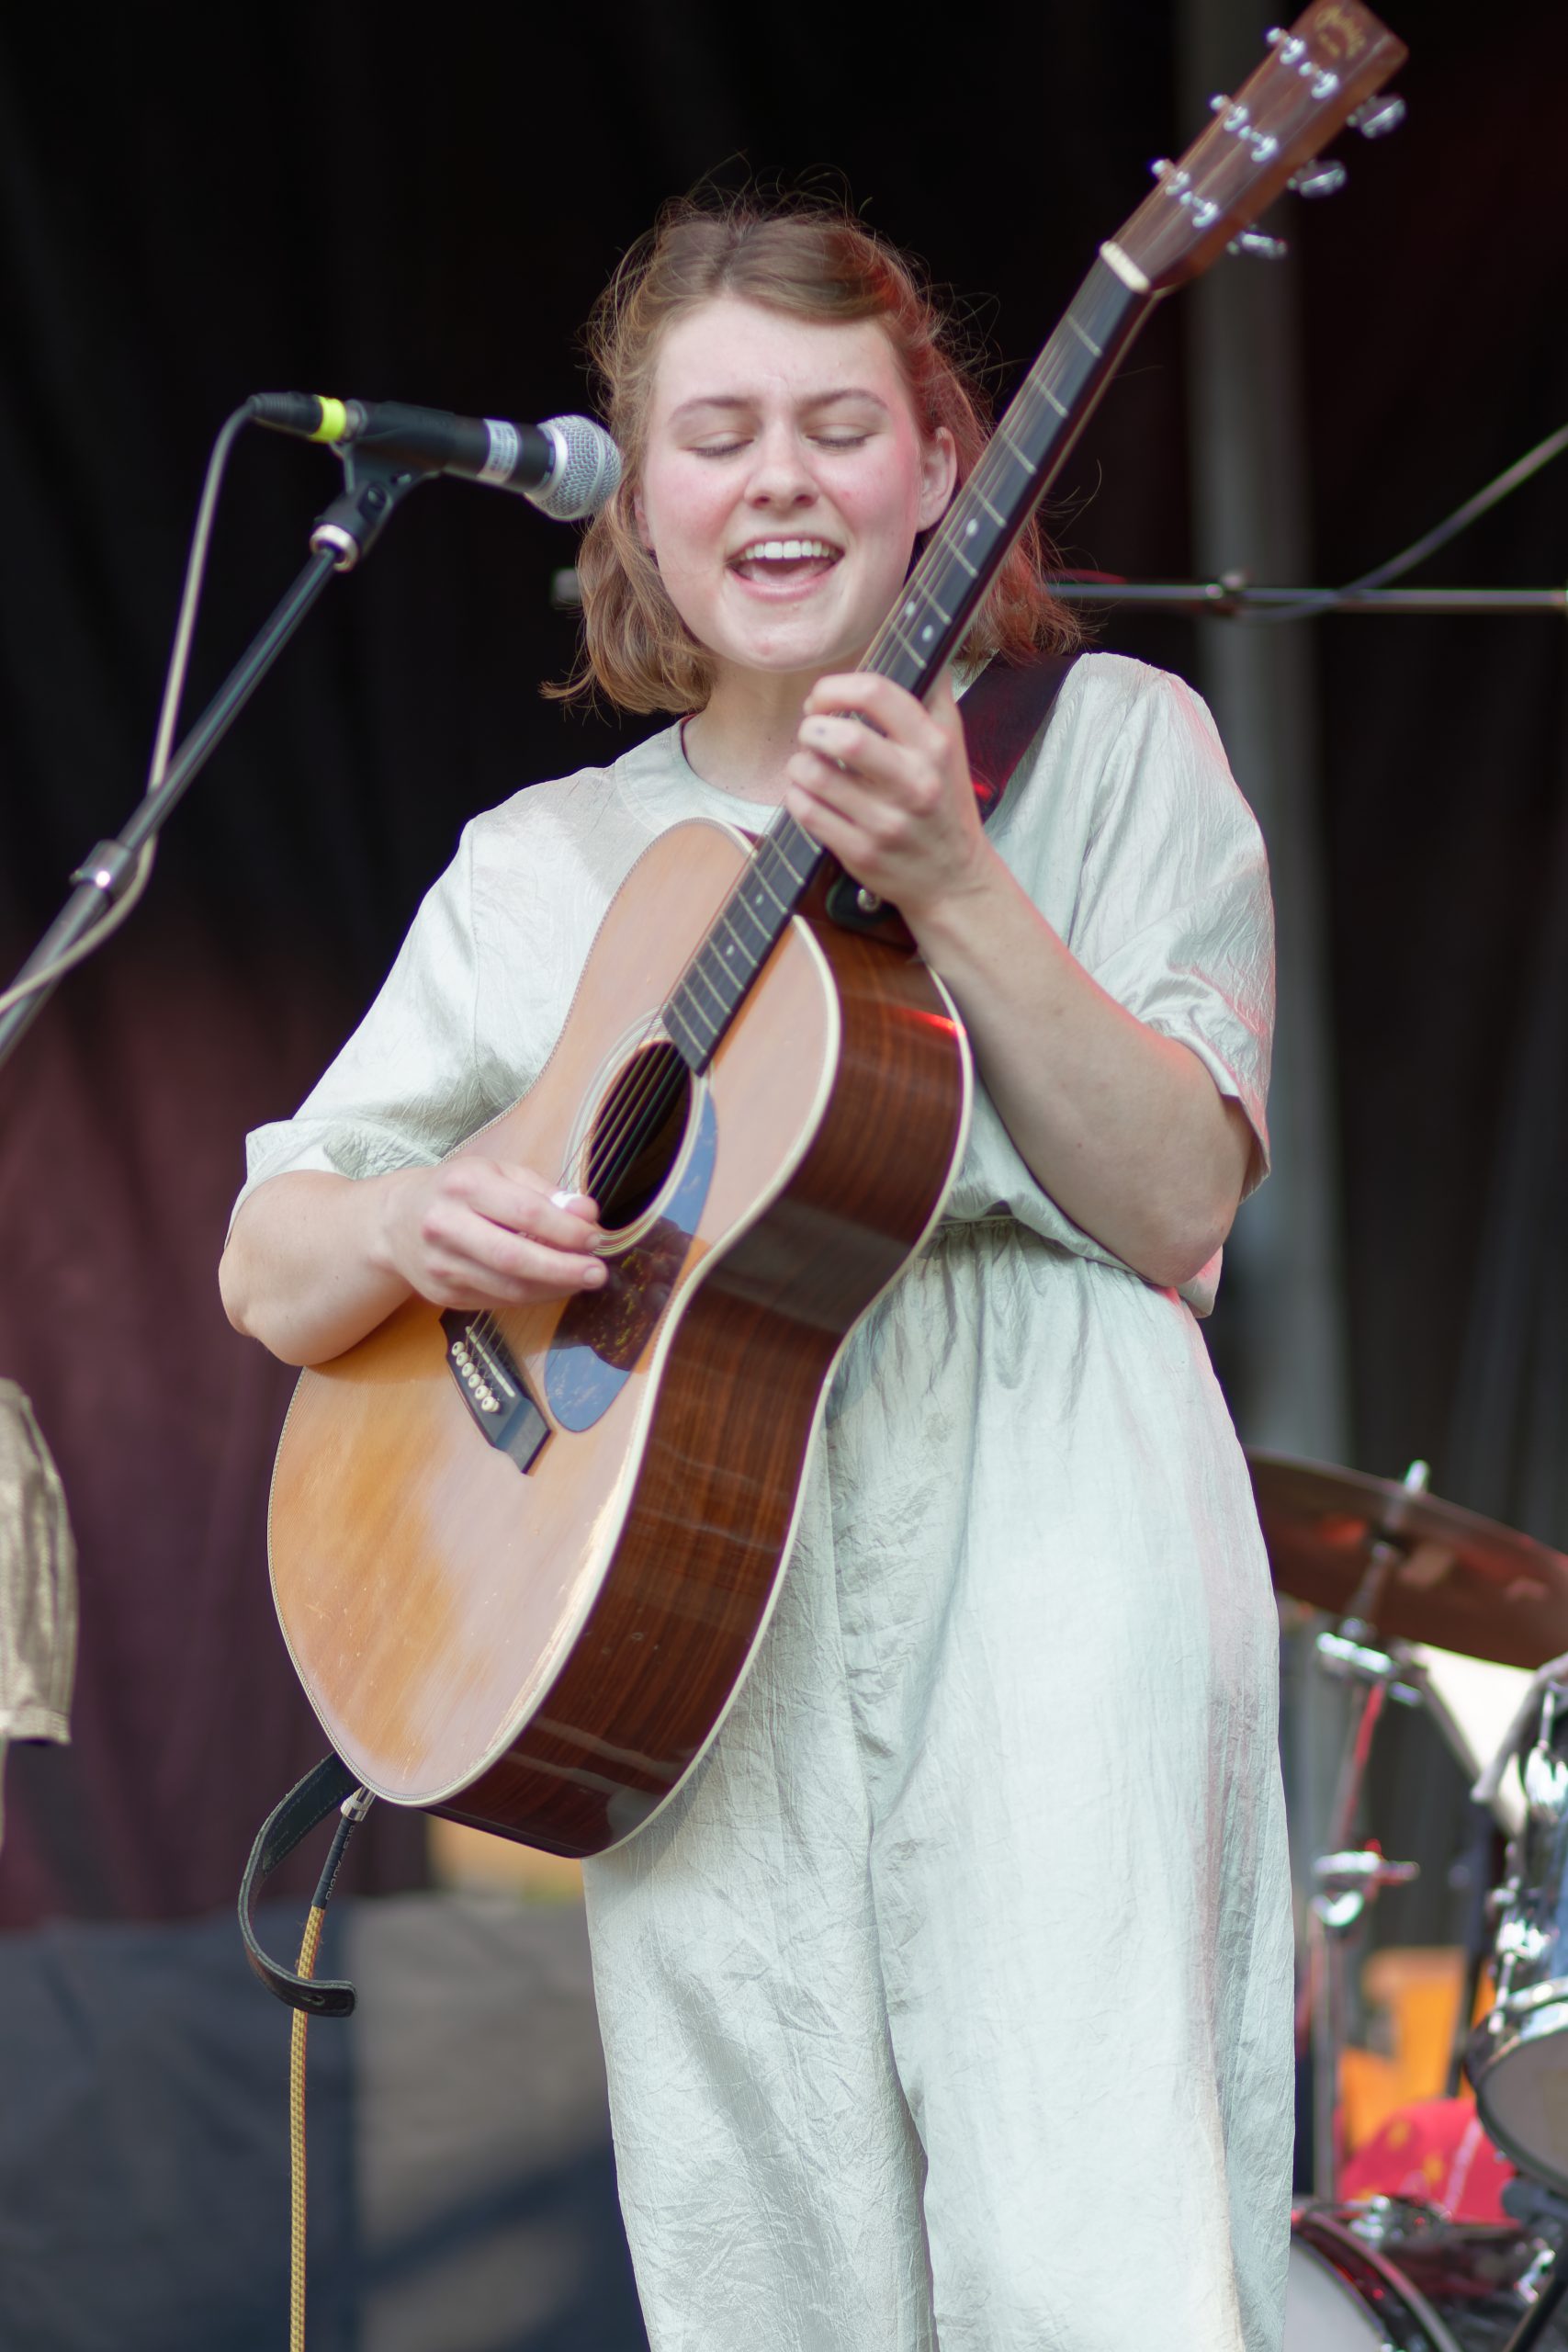 Kate Rhudy performing at the Moore Square venue
Photo by Ford Bowles